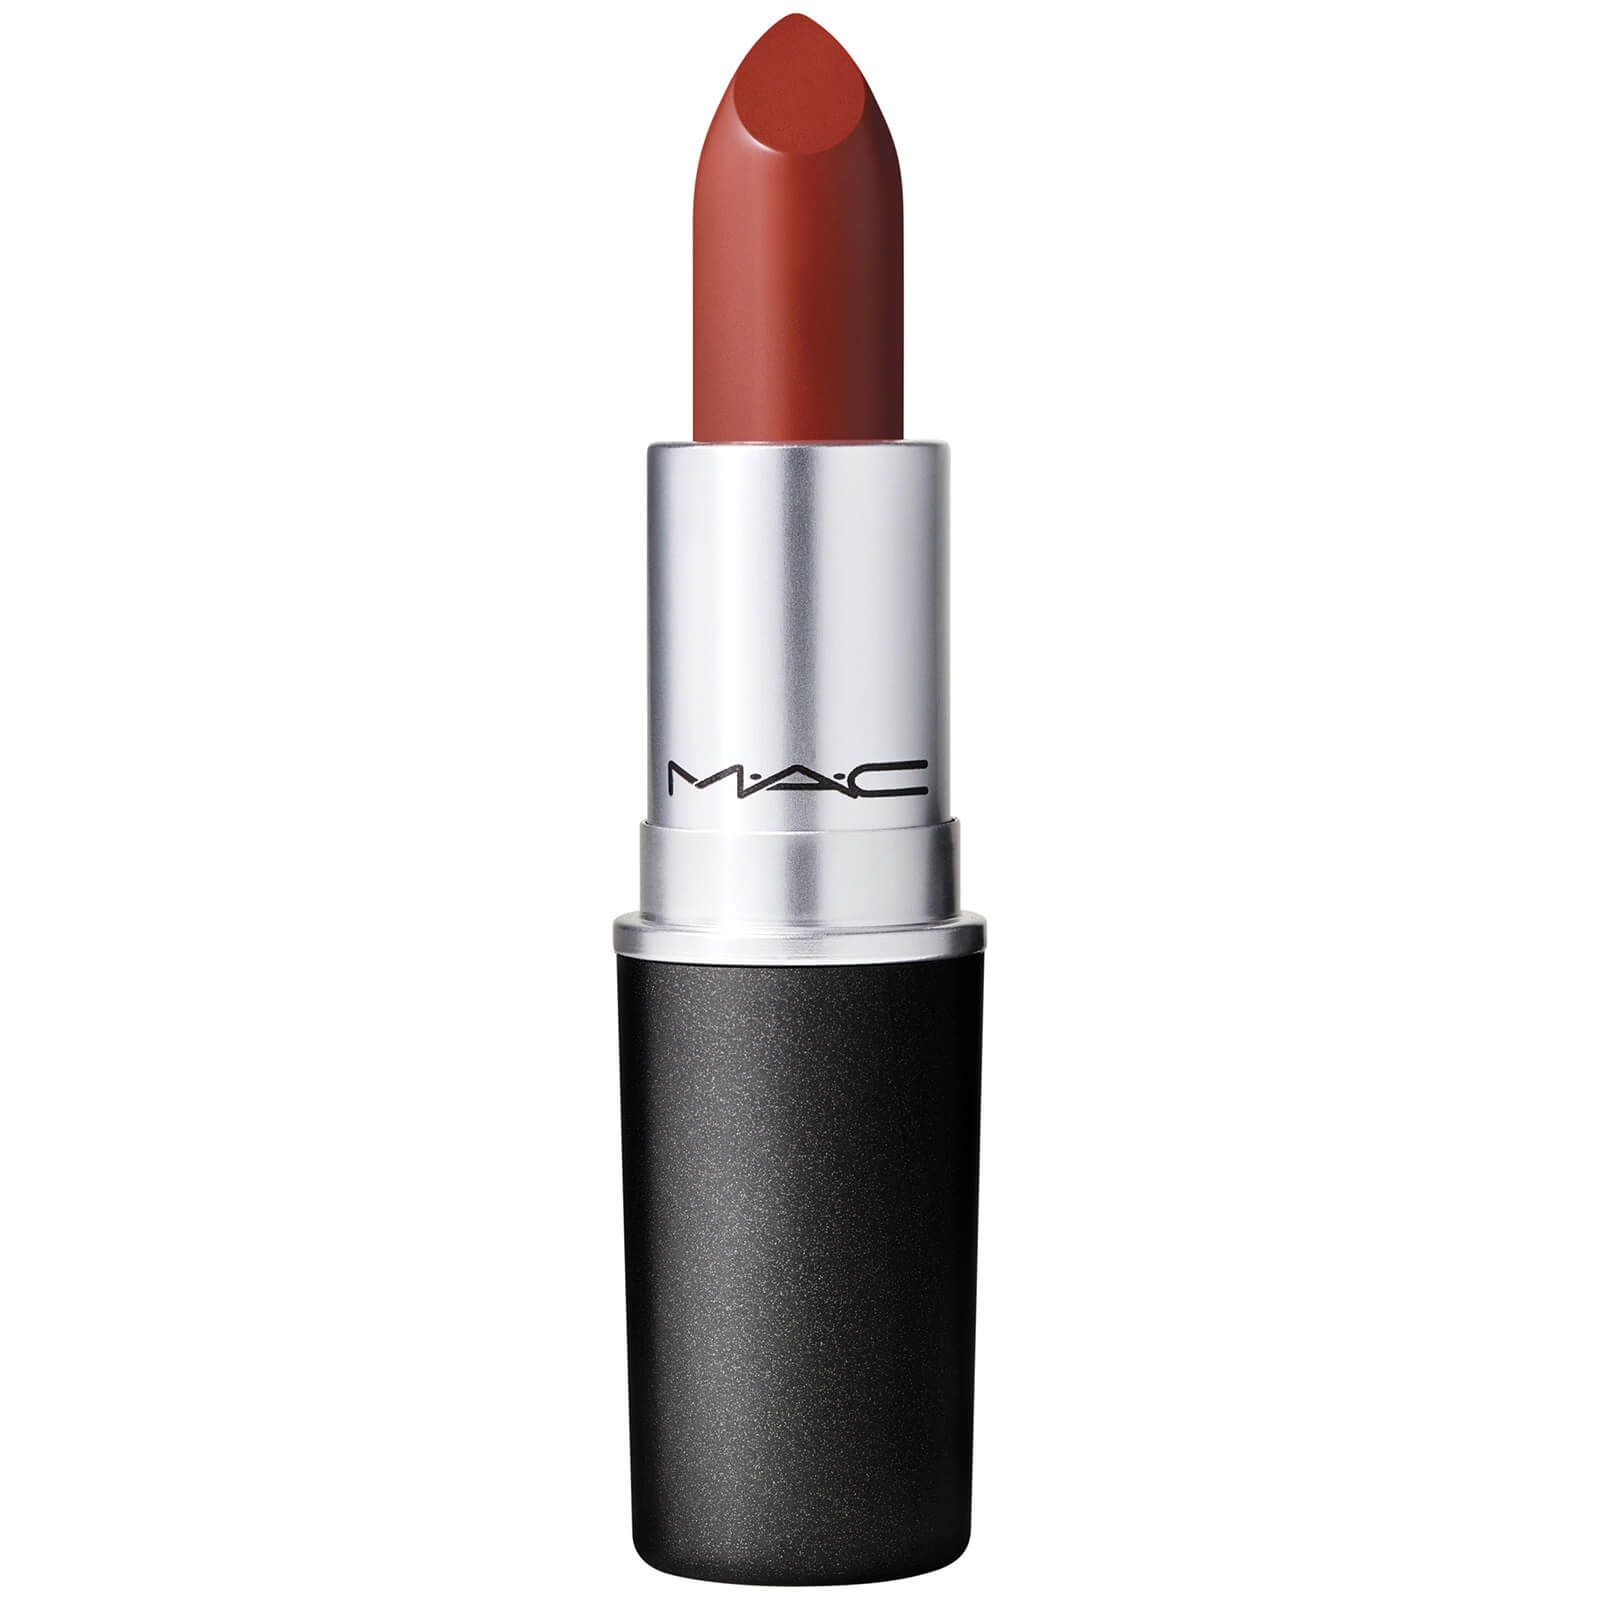 MAC Amplified Crème Lipstick Re-Think Pink (Various Shades) - Spill The Tea